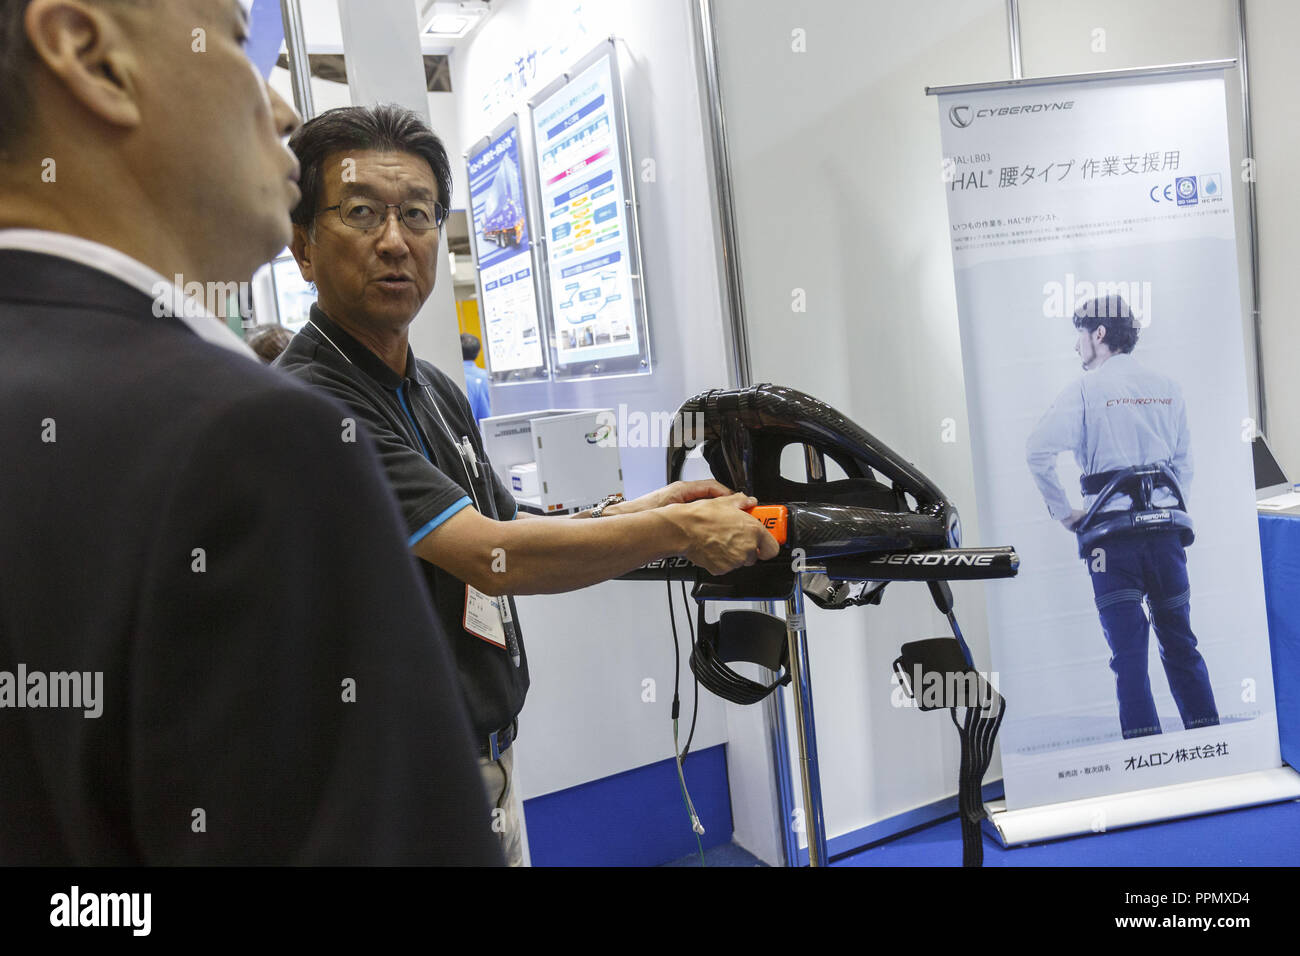 Tokyo, Japan. 26th Sep, 2018. An exhibitor introduces a powered exoskeleton HAL (Hybrid Assistive Limb) during the New Values enhanced by Machine, Material and Processing Technology in Tokyo Big Sight. The exhibition introduces IoT/AI, machine, material and processing technologies form September 26 to 28. Credit: Rodrigo Reyes Marin/ZUMA Wire/Alamy Live News Stock Photo